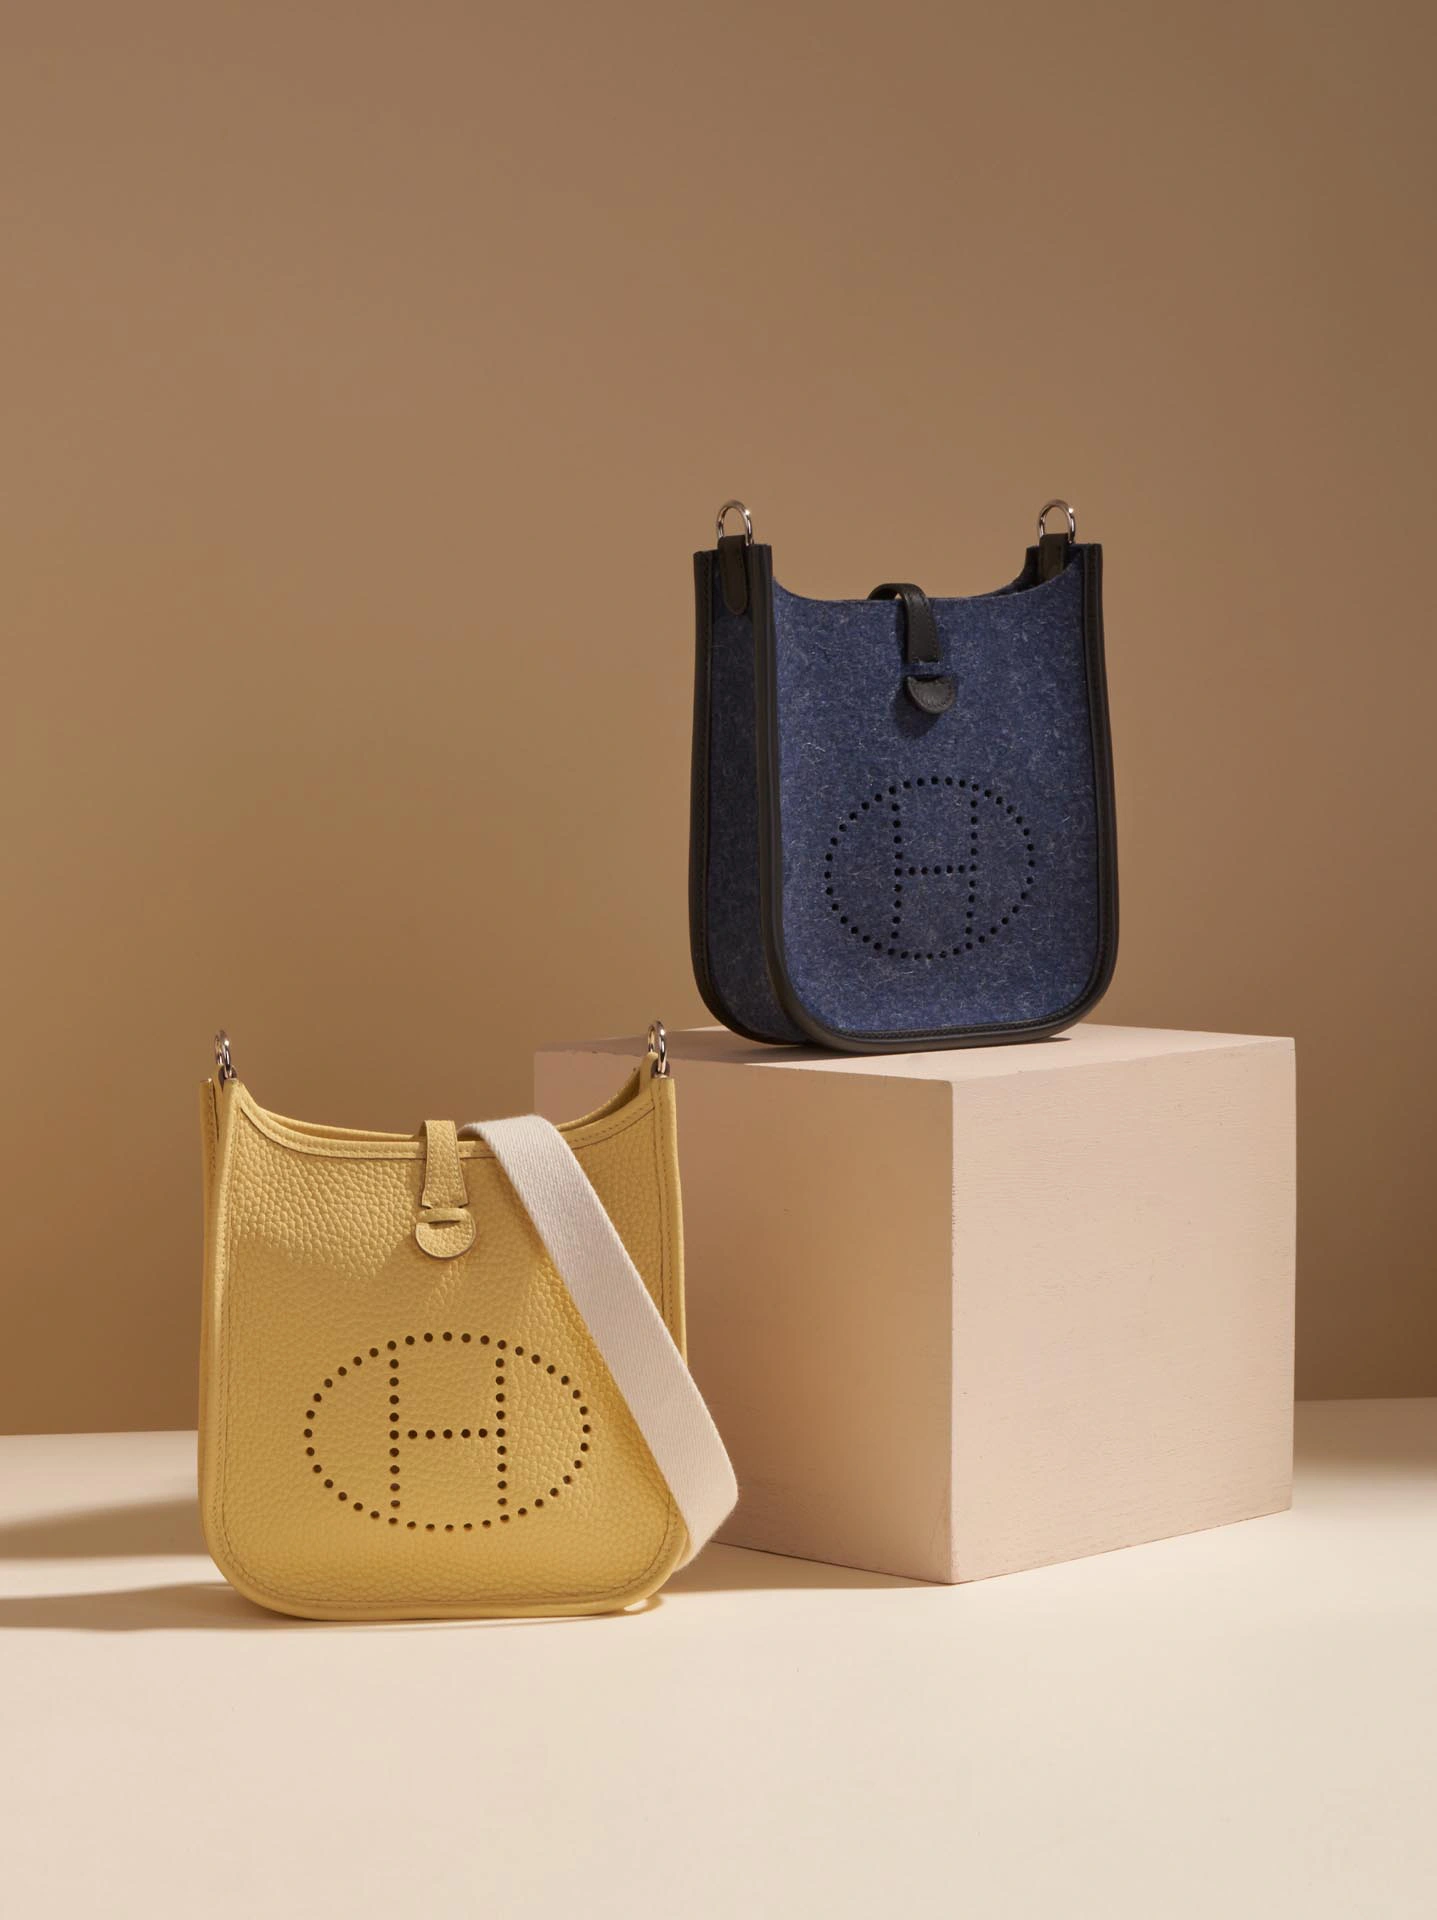 HERMÉS EVELYNE: EVERYTHING YOU NEED TO KNOW